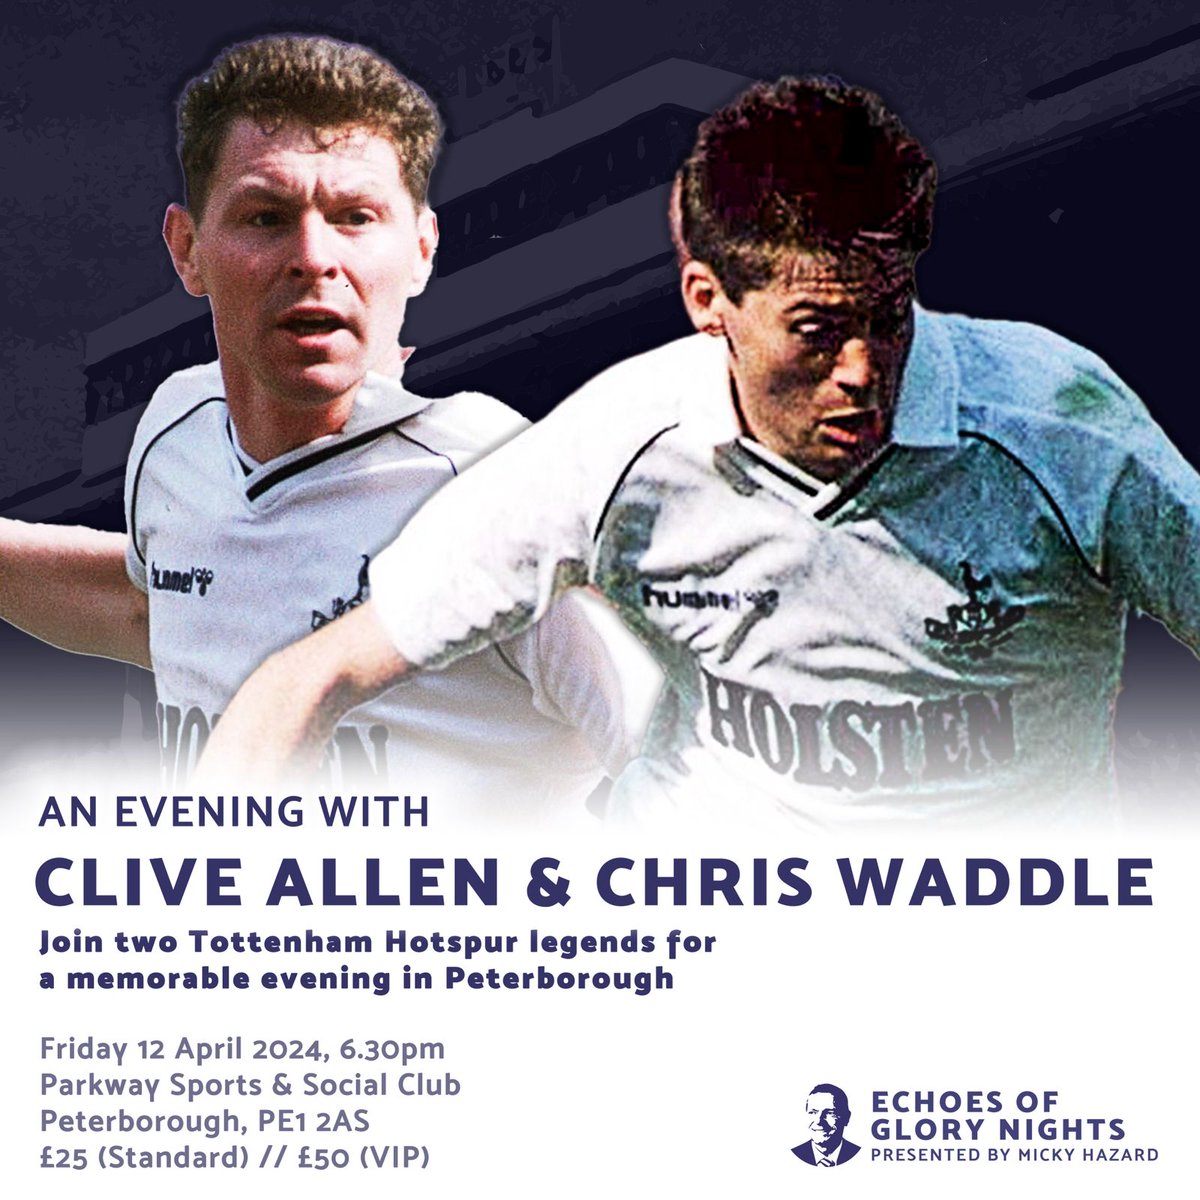 More VIP tickets sold today, I know there's a few of you who want tickets I'm holding them for you till your ready to pay I really need payment soon please There's still tickets available VIP & Standard gimme a shout and I can sort it out for you #COYS #LegendsOfTheLane #Spurs